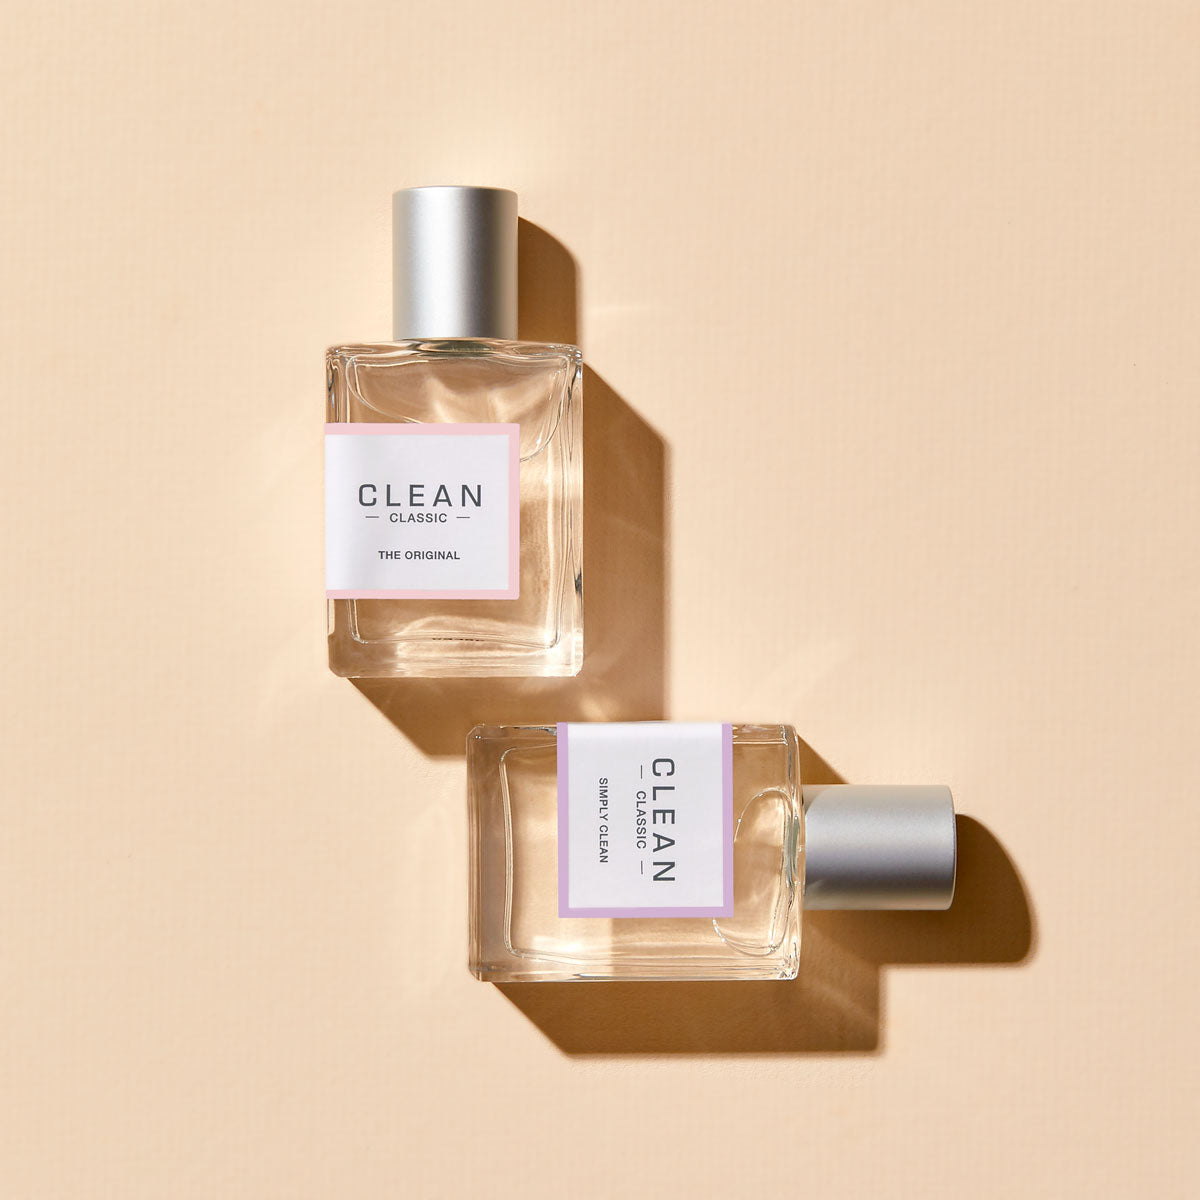 Limited Edition Clean Classic Beach Vibes  Clean Perfume by Clean Beauty  Collective – CLEAN Beauty Collective